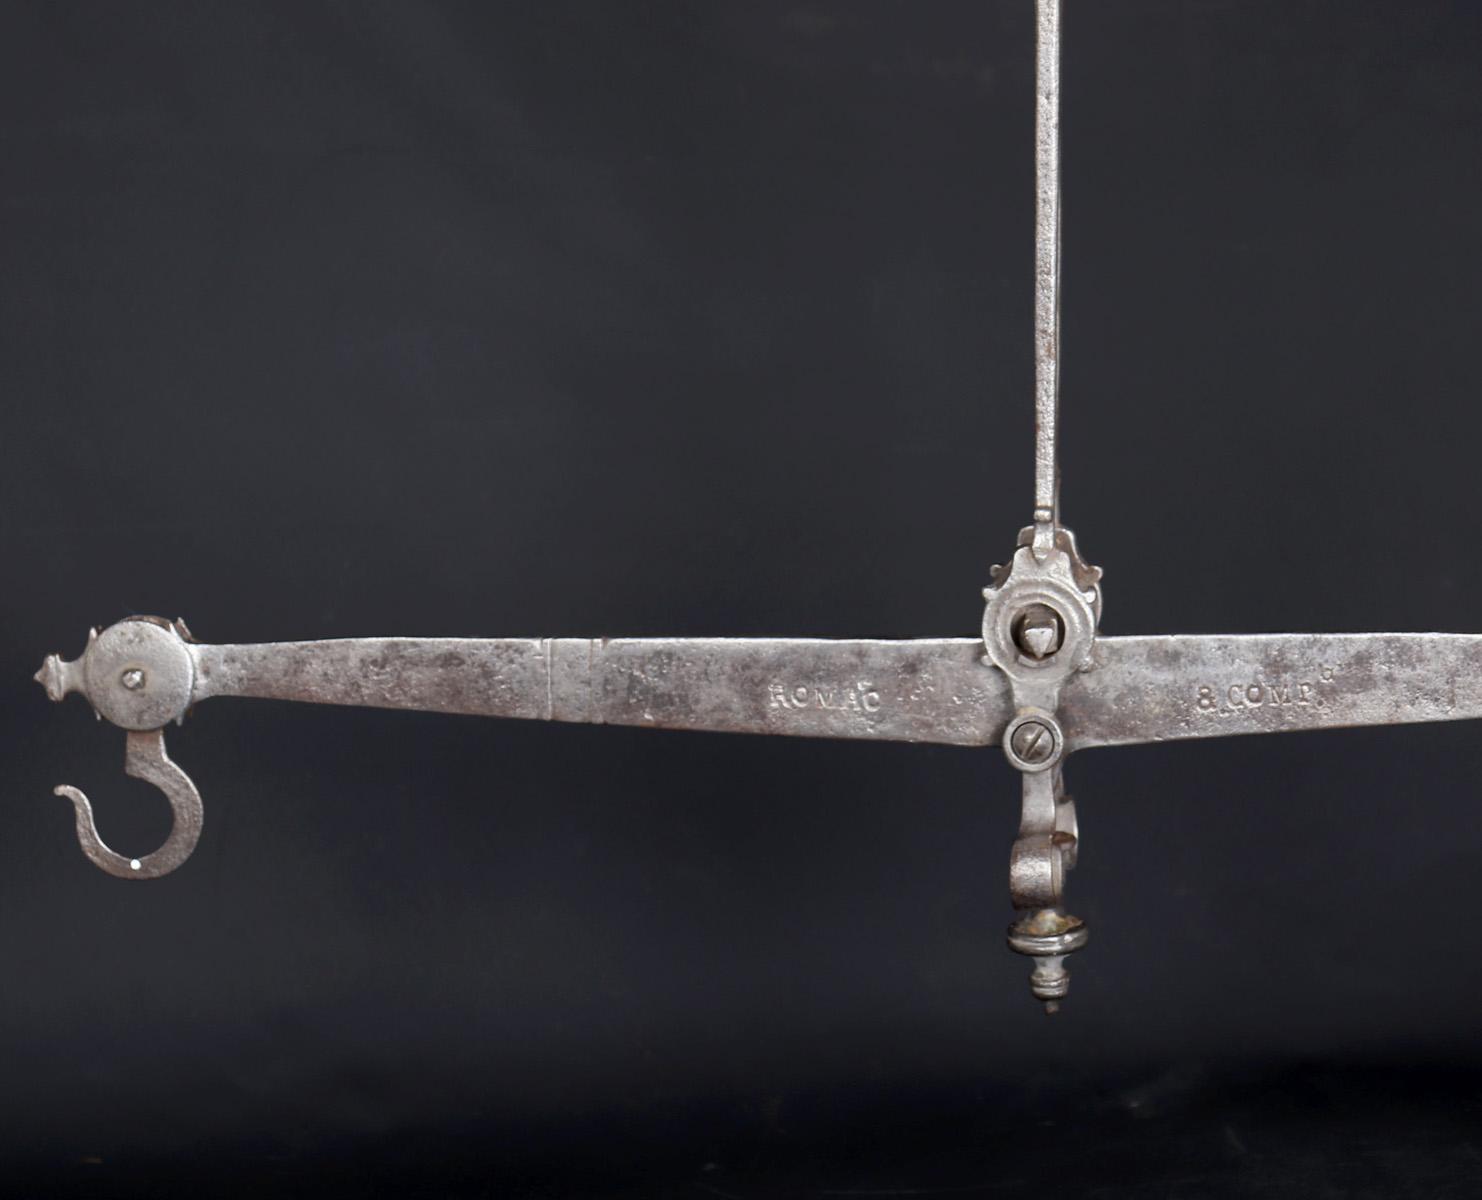 Antique Colonial Wrought Iron Scale, 18th C.